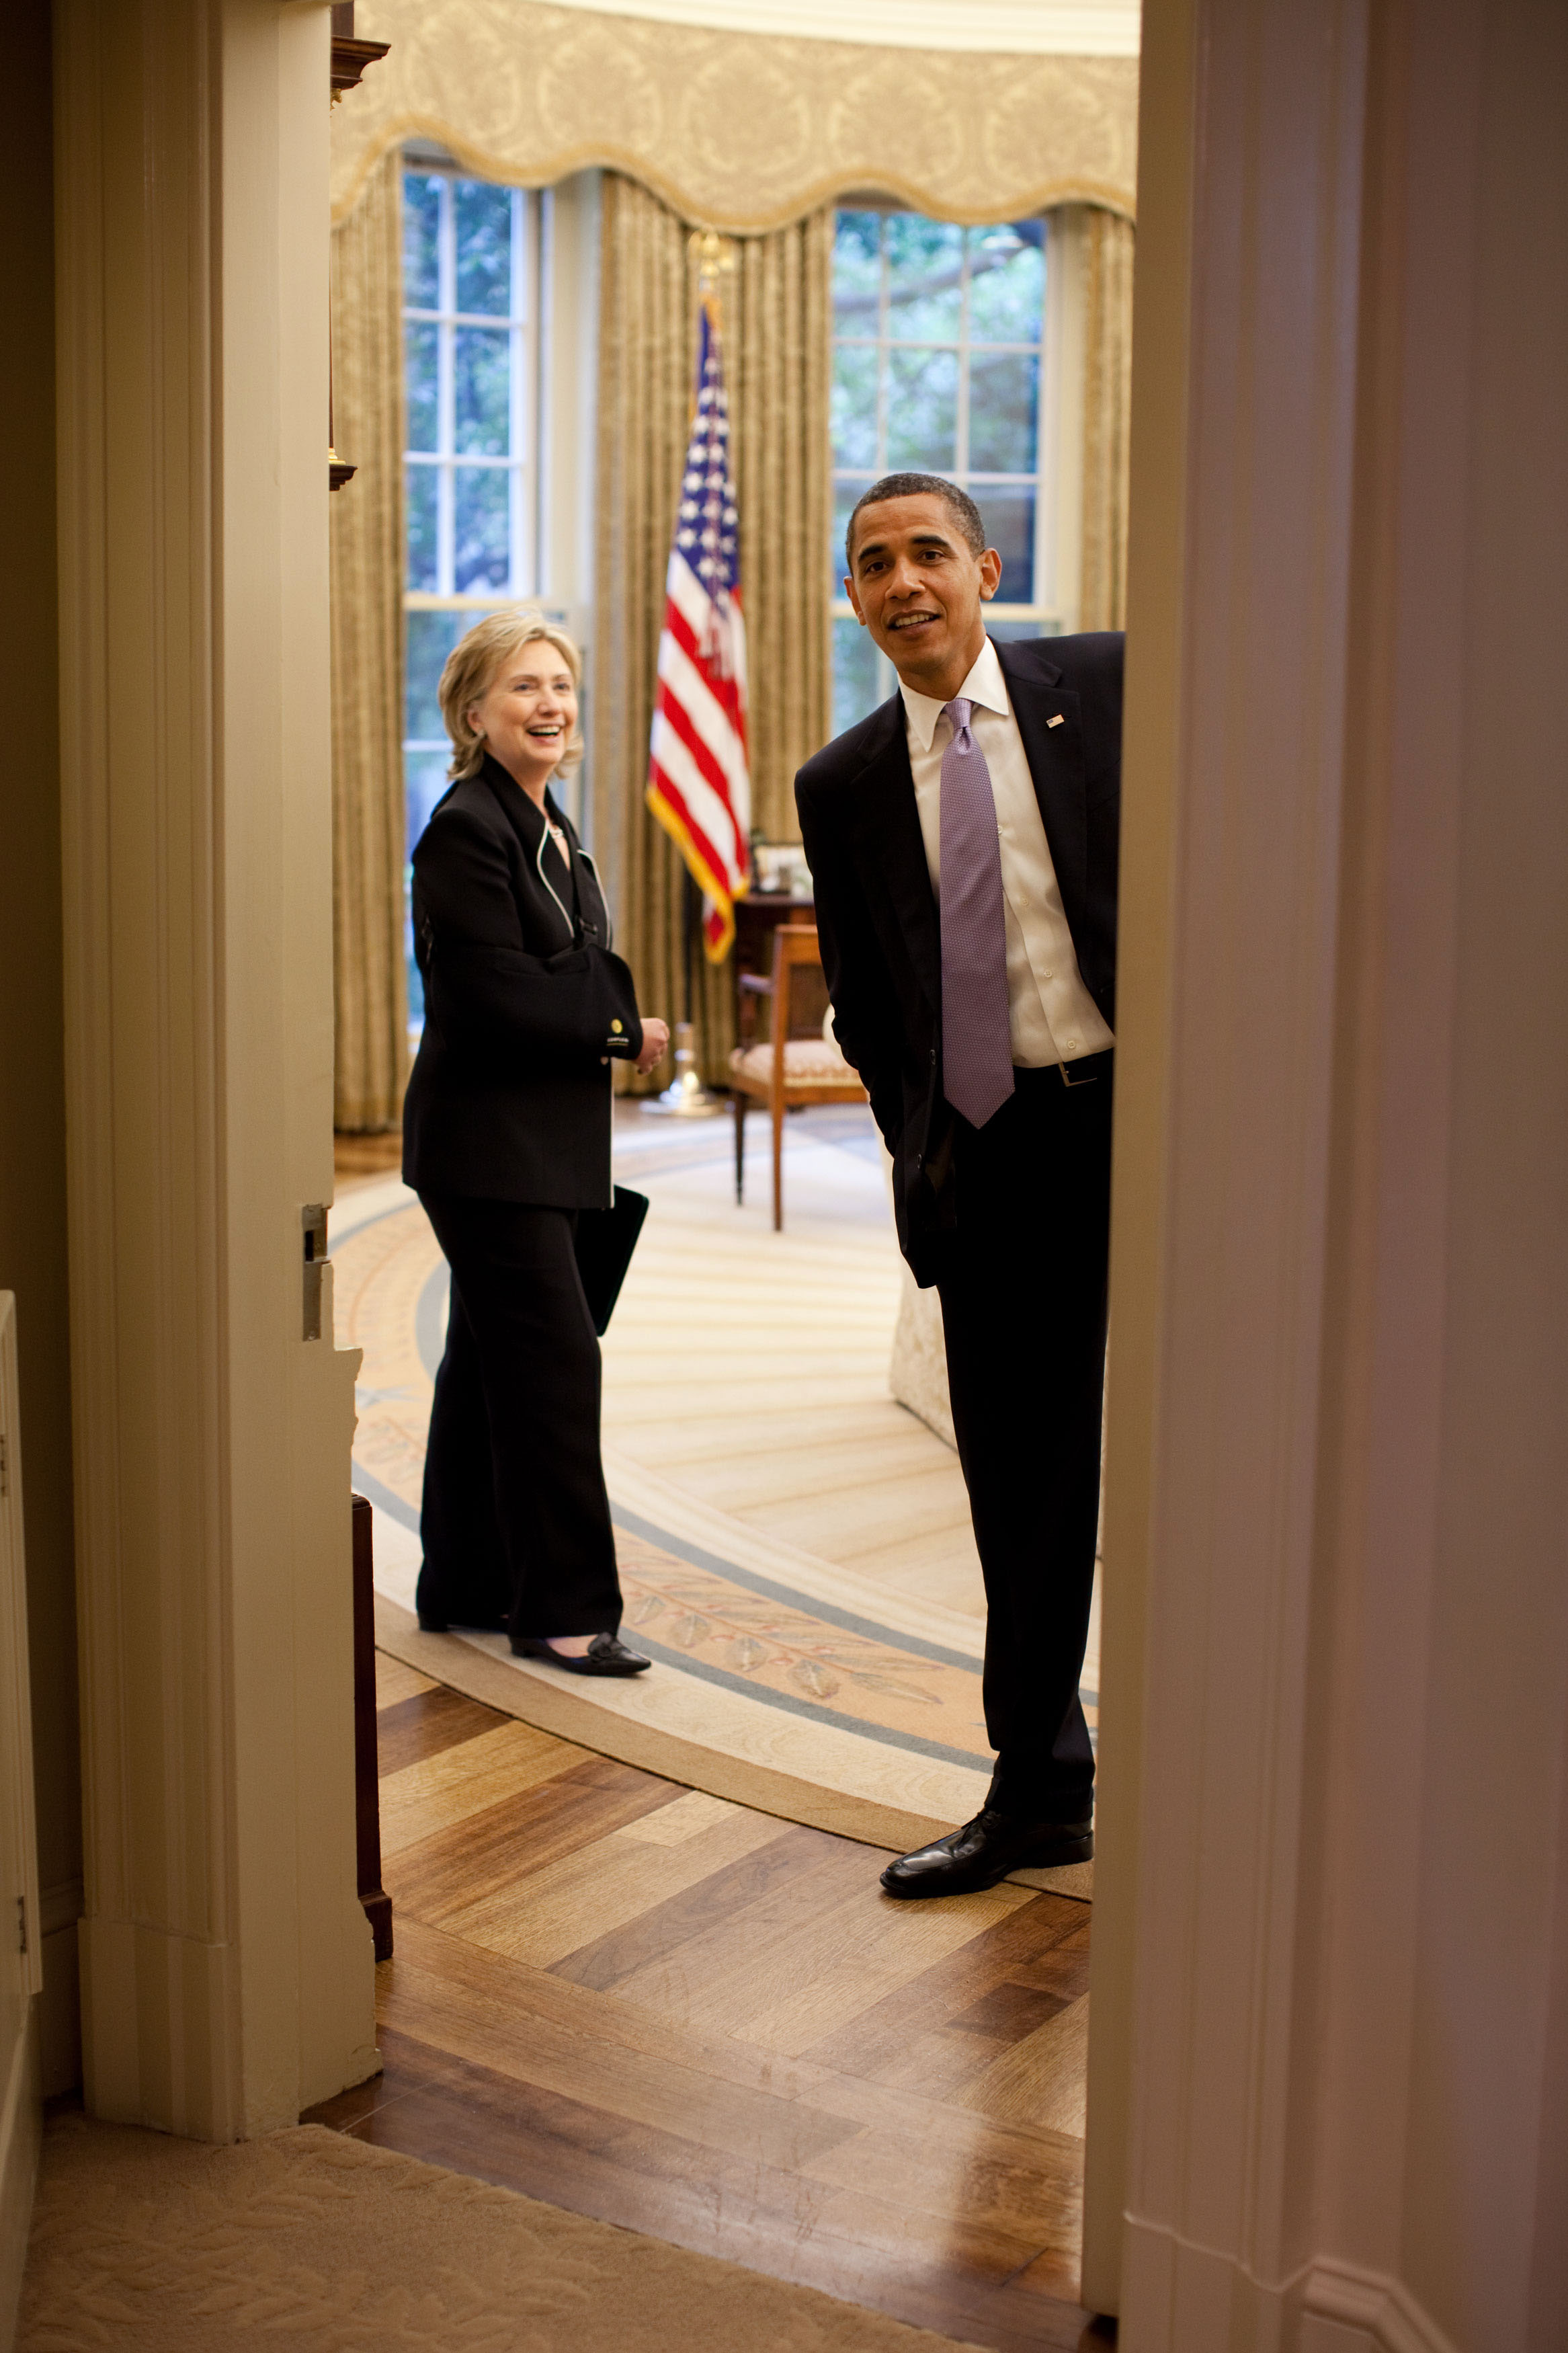 President Barack Obama during a meeting in the Oval Office with Secretary of State Hillary Clinton on July 1, 2009. (Official White House Photo by Pete Souza) This official White House photograph is being made available for publication by news organizations and/or for personal use printing by the subject(s) of the photograph. The photograph may not be manipulated in any way or used in materials, advertisements, products, or promotions that in any way suggest approval or endorsement of the President, the First Family, or the White House.